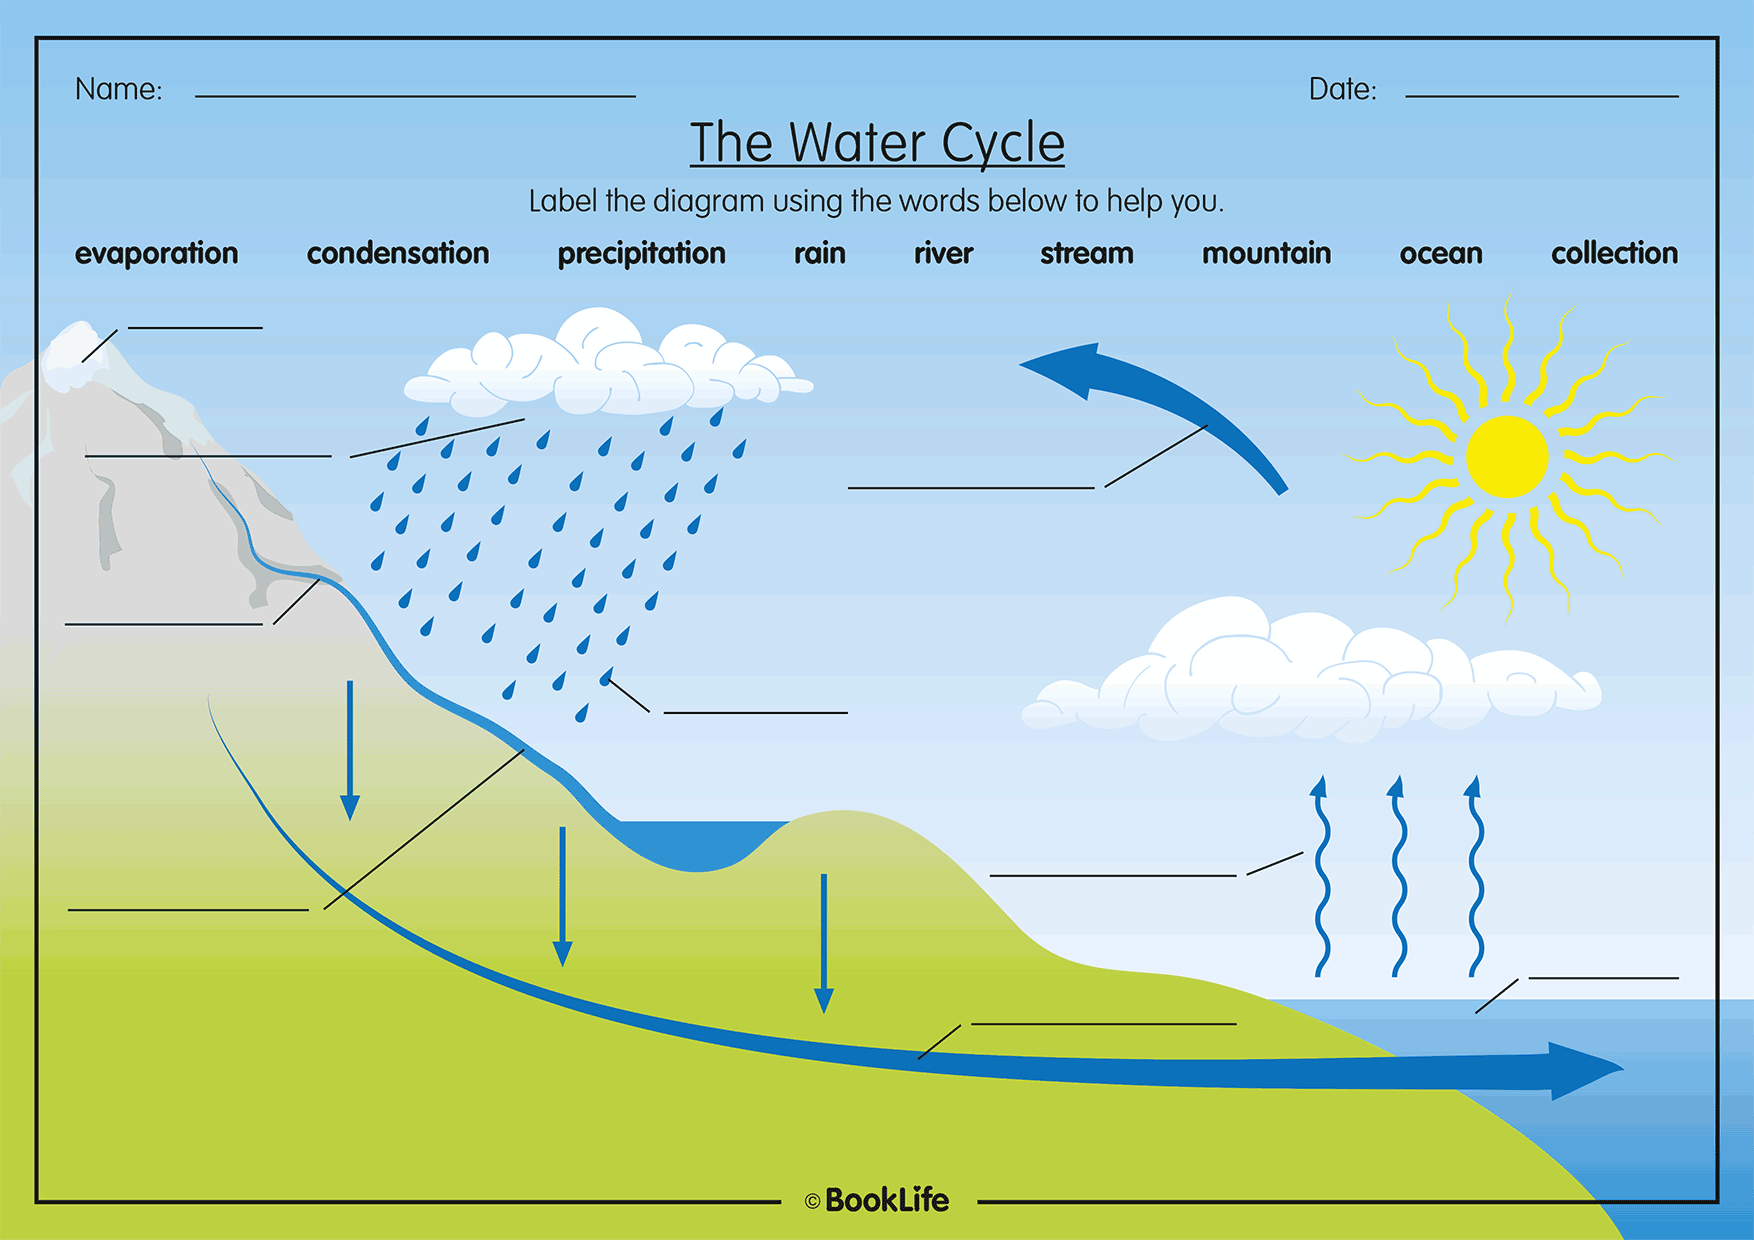 The Water Cycle by BookLife